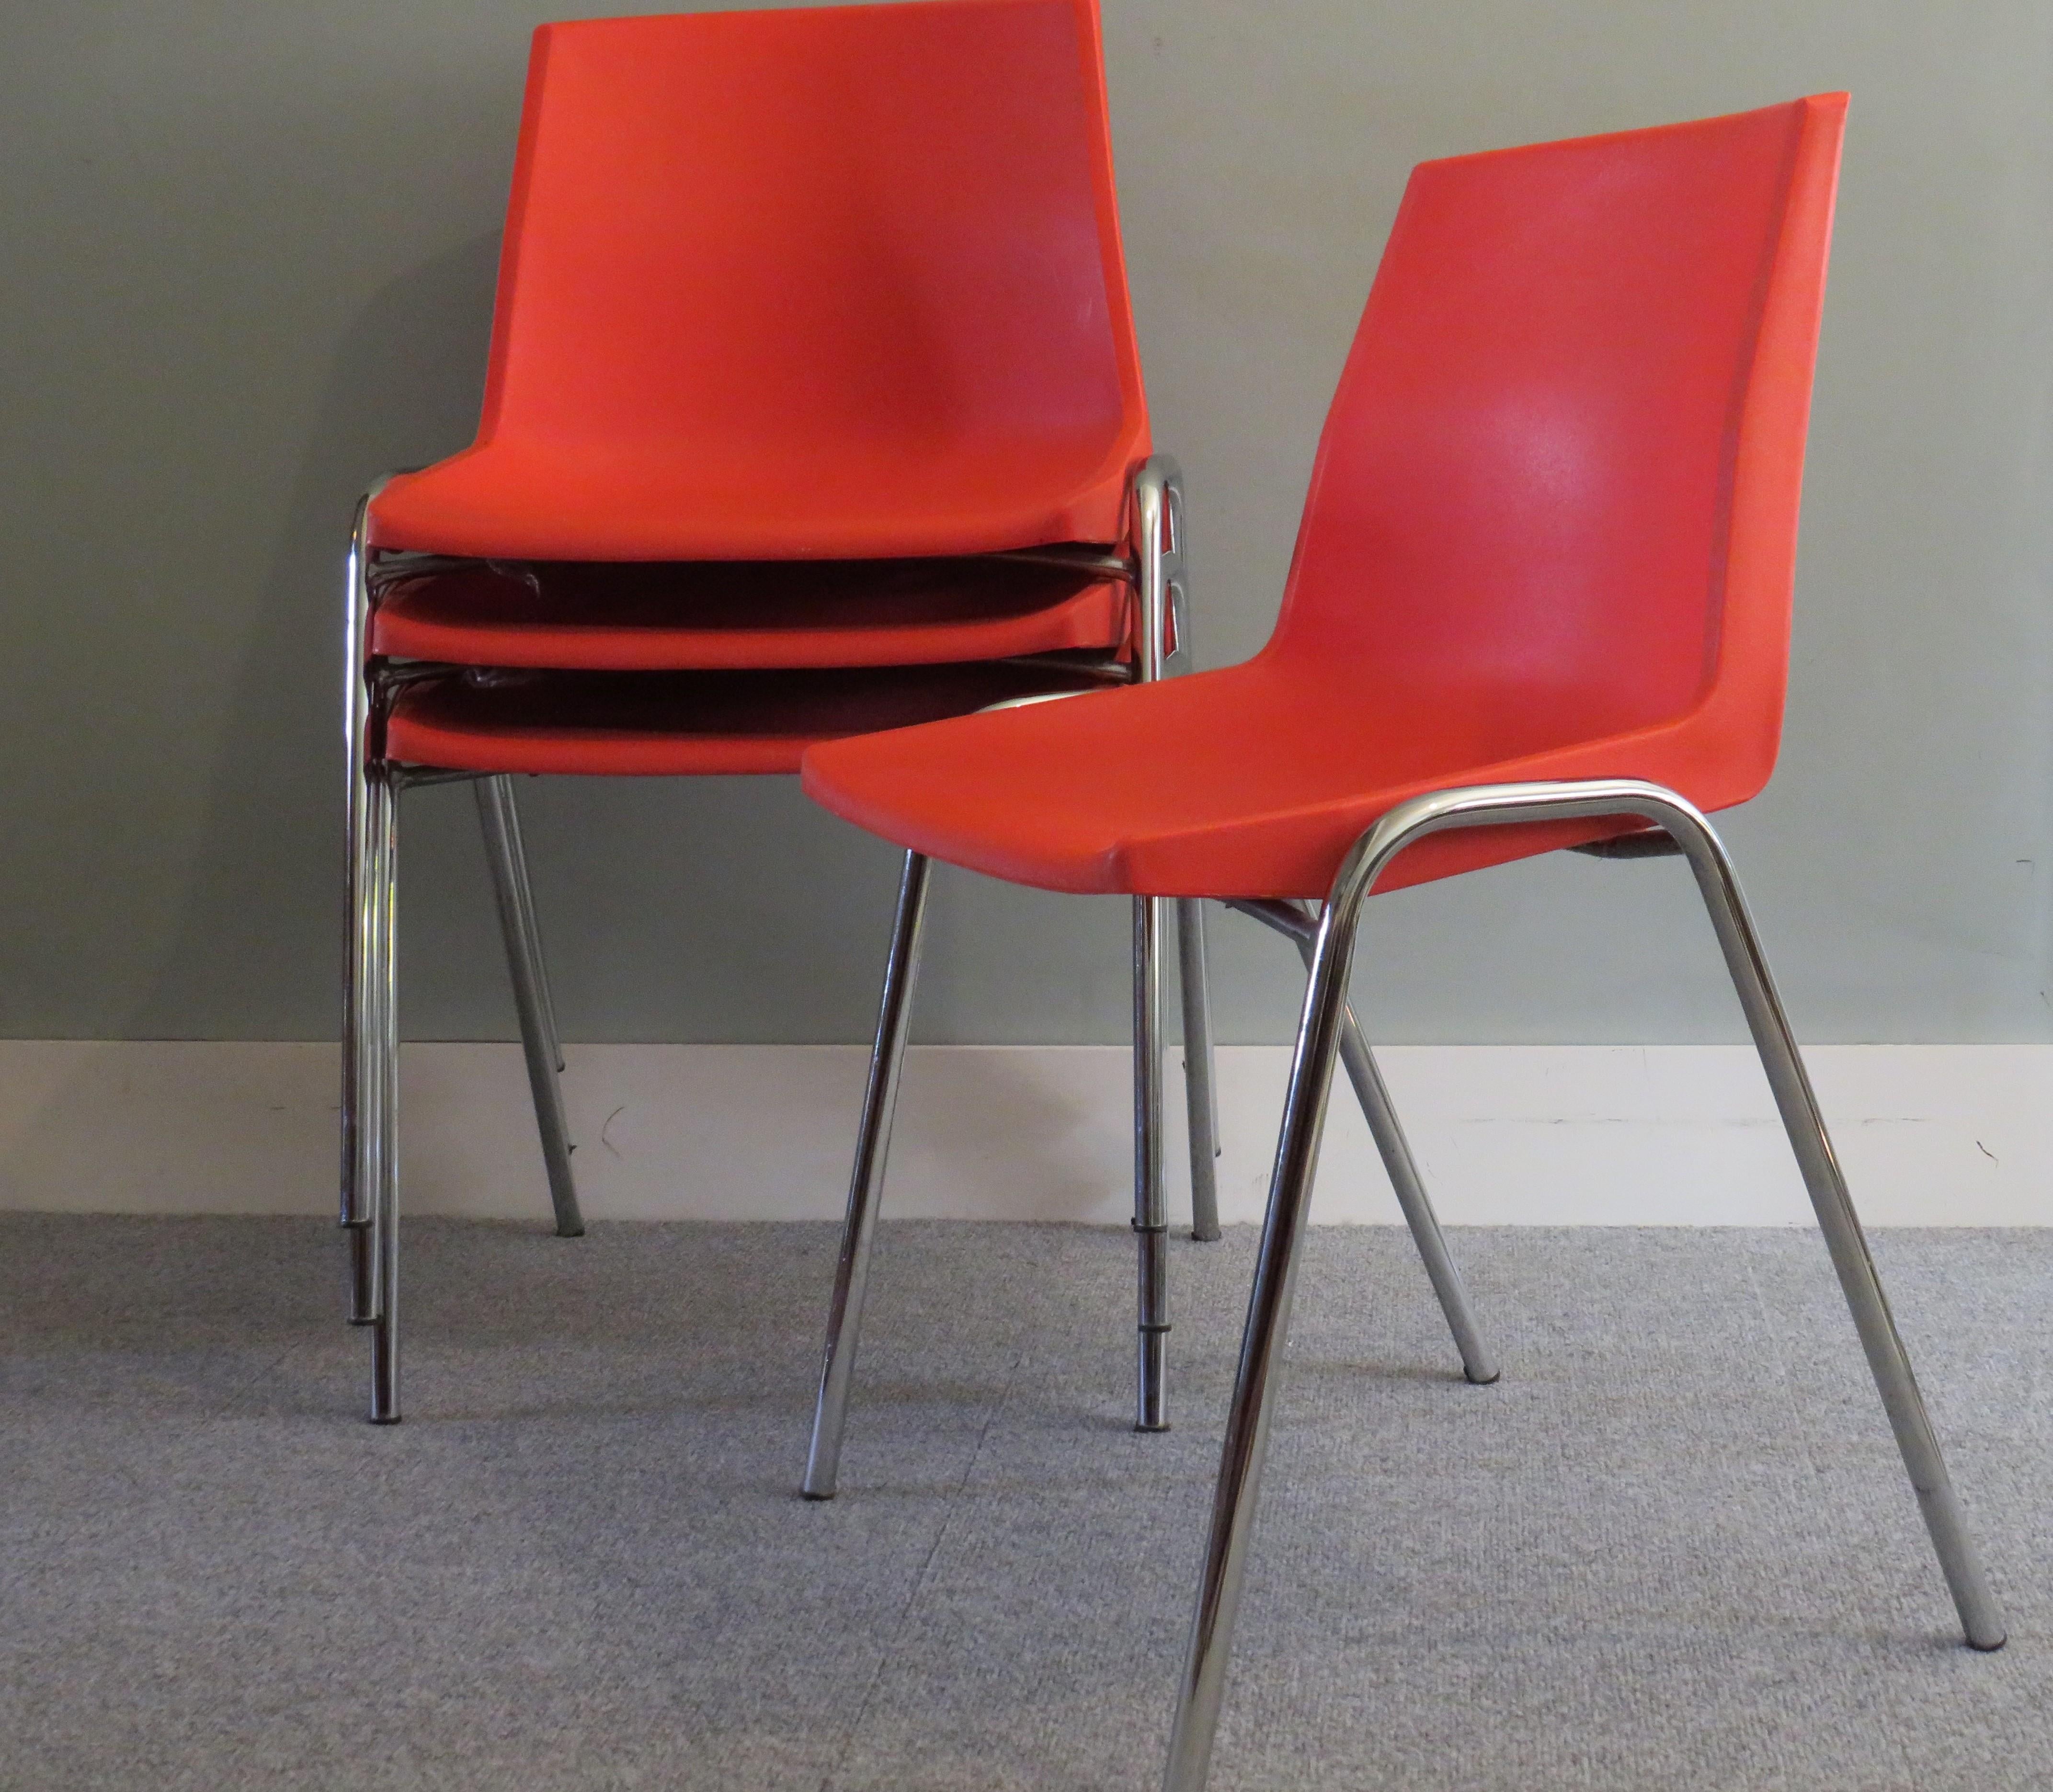 Set of 4 stackable orange chairs with chrome base and plastic seat.
They were manufactured in the 70s by OVP Belgium and designed by J.P. Emonds.
This designer is also known for hos designs of the first plastic bottle of the famous Belgian Spa